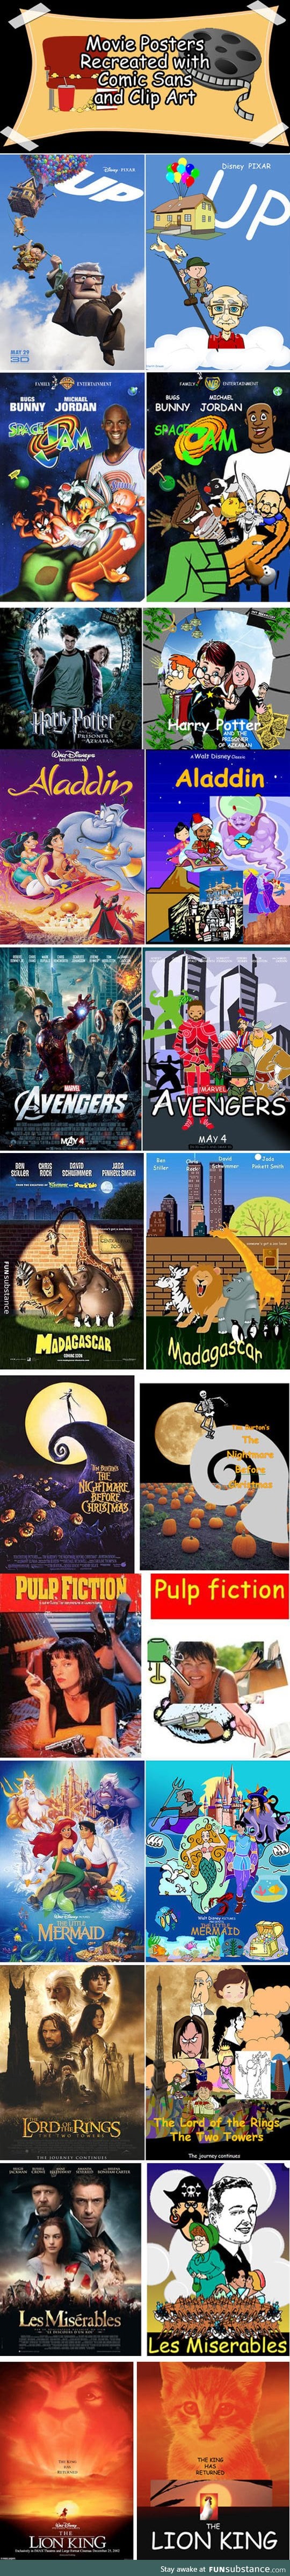 If movie posters were recreated using comic sans and clip art